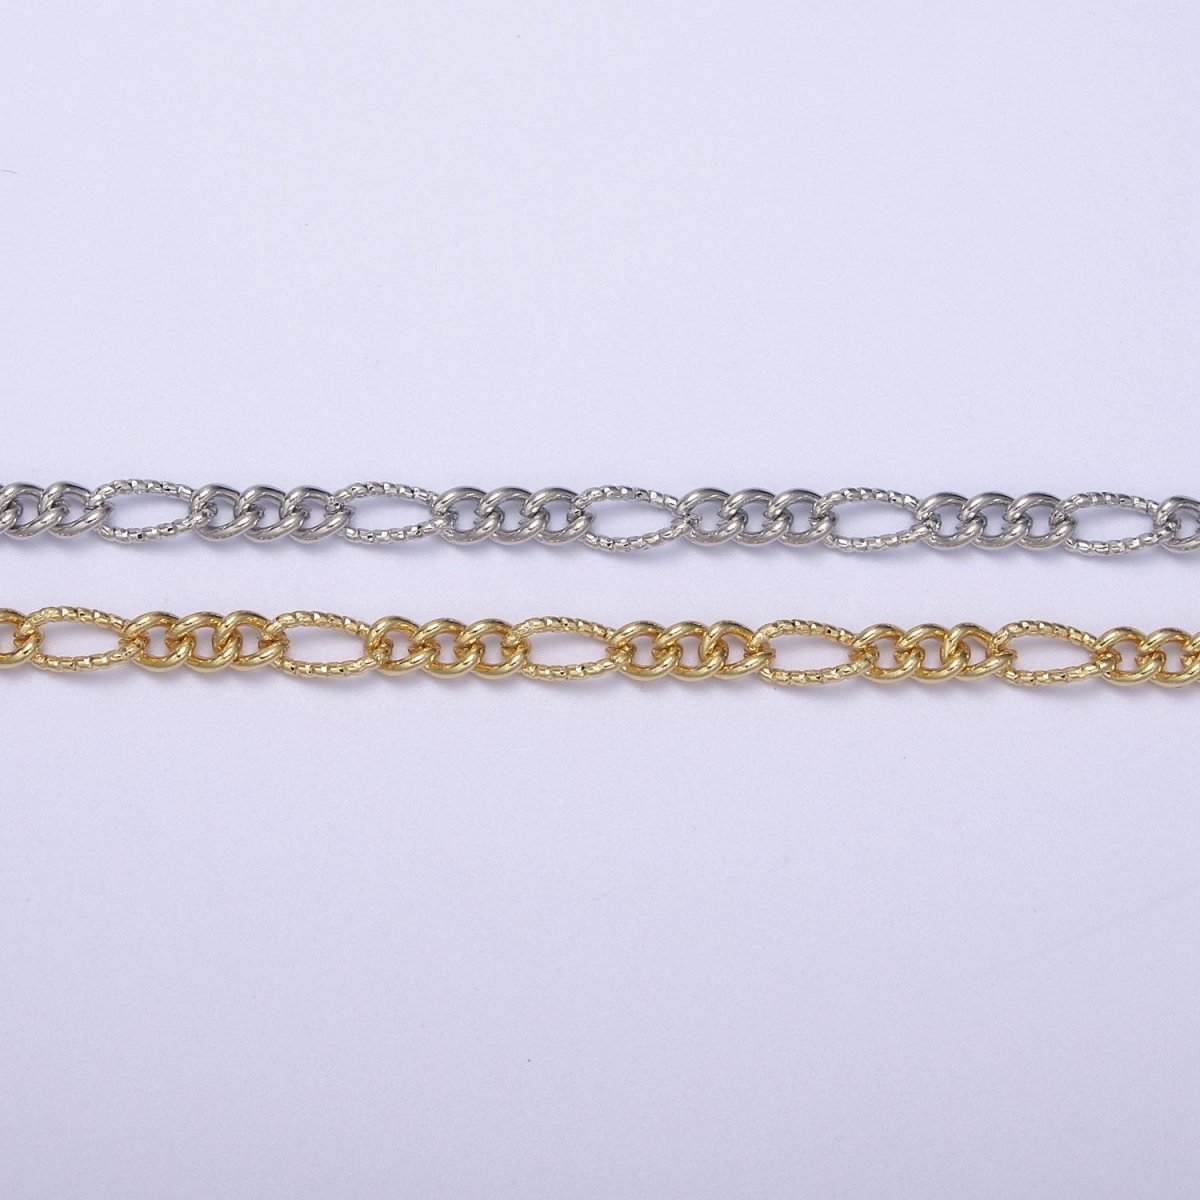 Dainty 4mm Unique Figaro Chain in Silver & Gold color, 24K Gold Filled Textured Figaro Chain Sold by Yard For Jewelry Making Supply Component | ROLL-629, ROLL-630 Clearance Pricing - DLUXCA